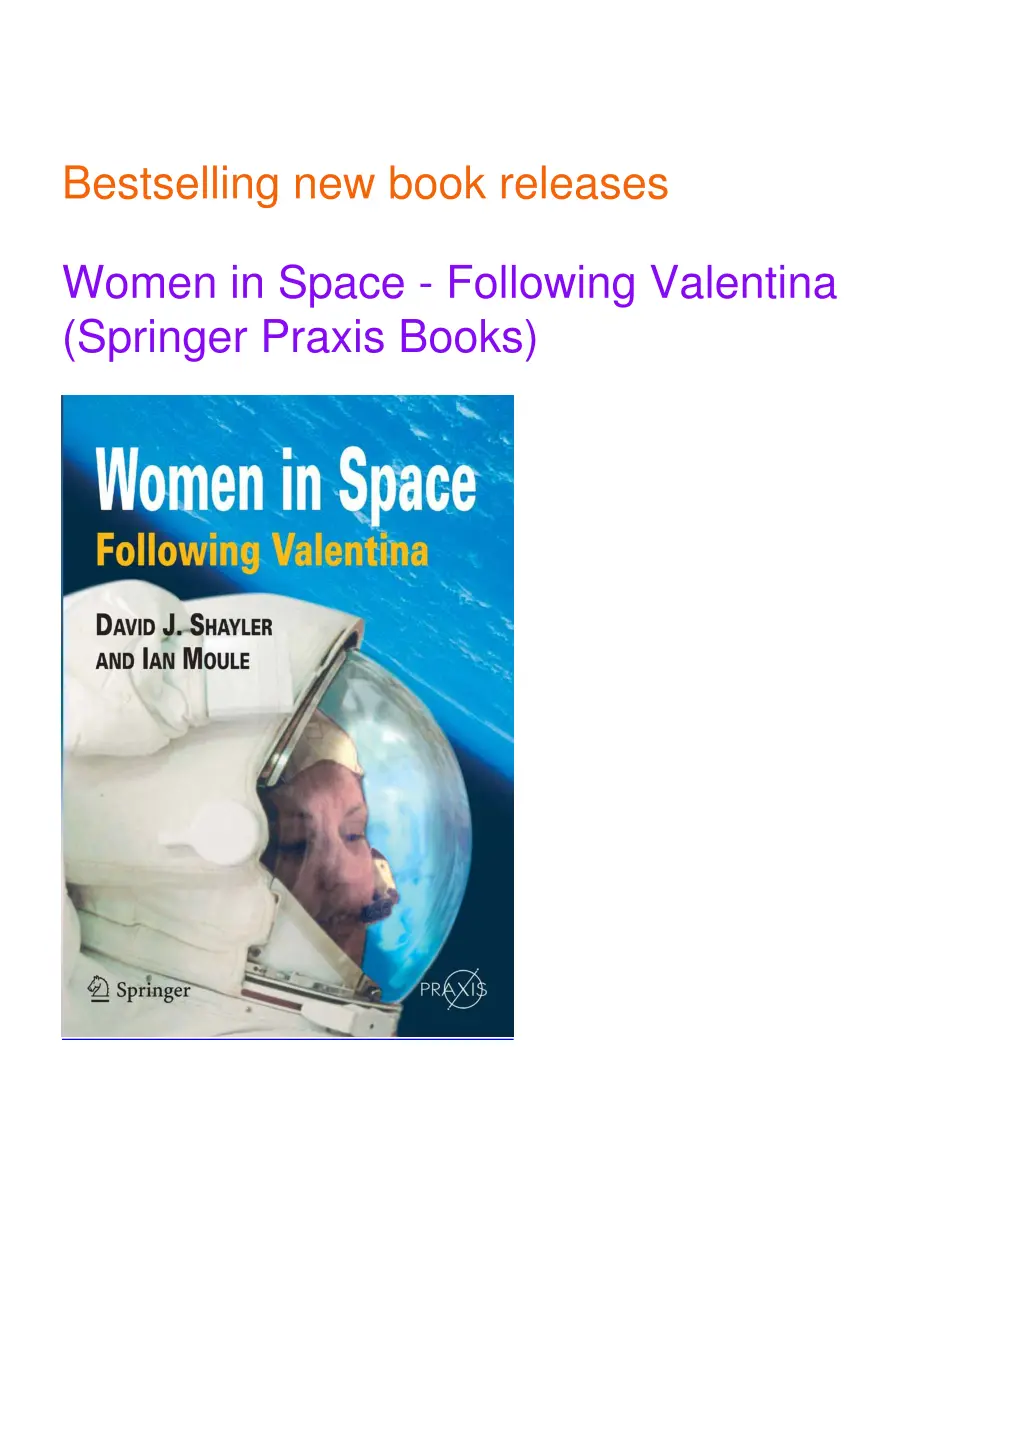 bestselling new book releases women in space